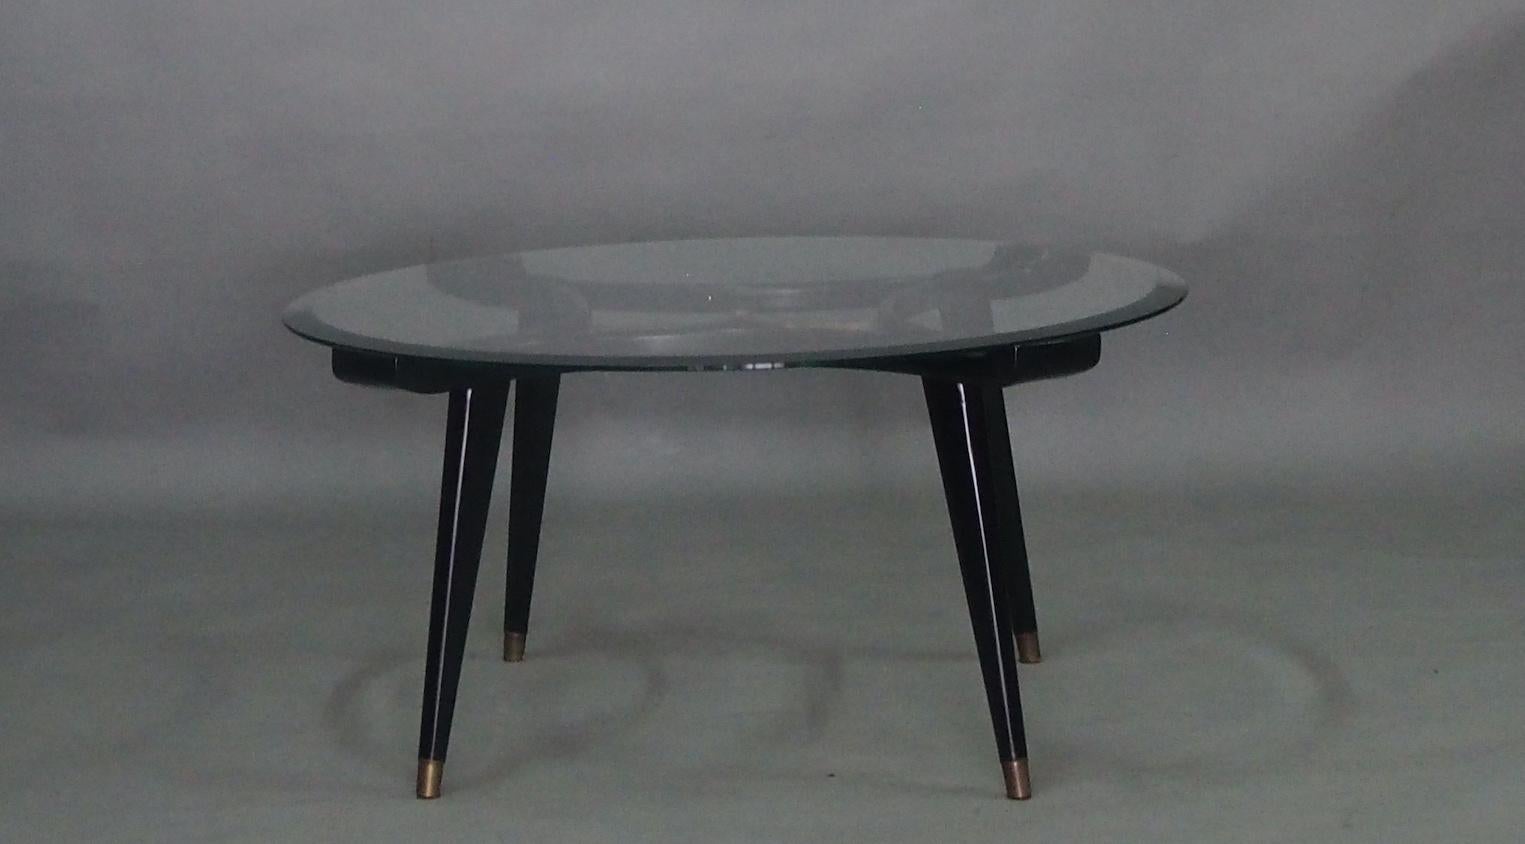 Round coffee table, designed by William Watting, produced by Fristho, the Netherlands, 1950s. A very elegant design due to the organic warm walnut wood combined with a transparent glass top. The center shows a beautiful solid brass detail, tapered